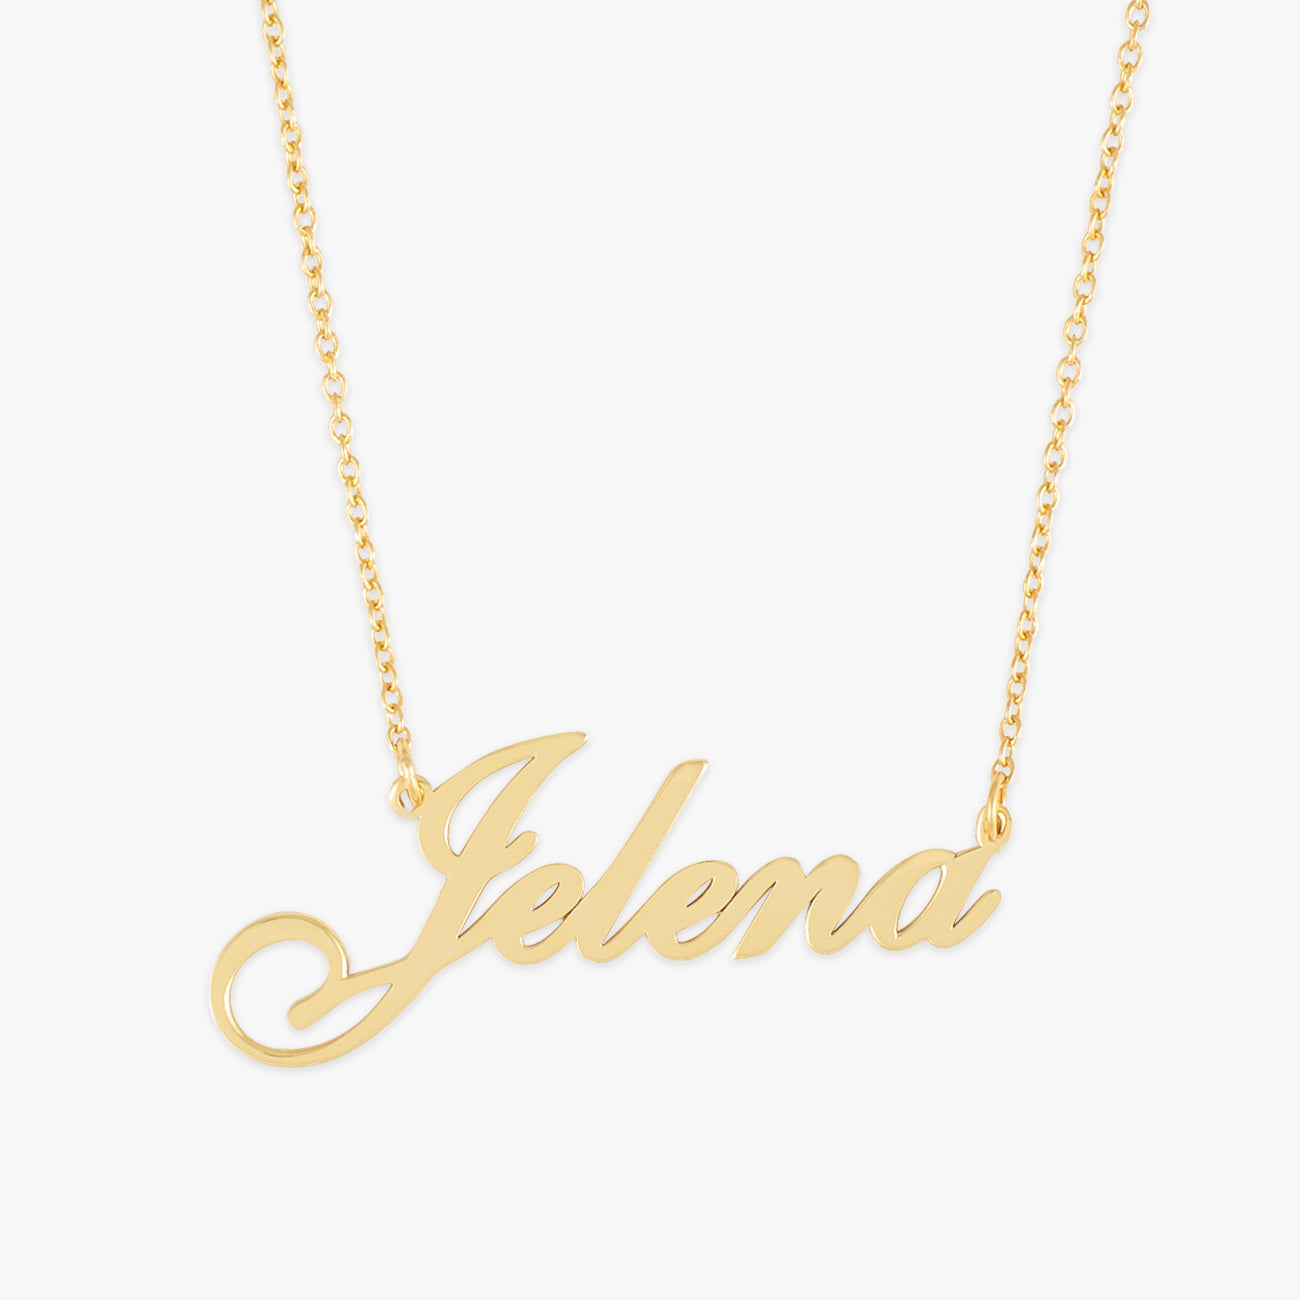 Unique Personalized Name Necklaces for Every Style